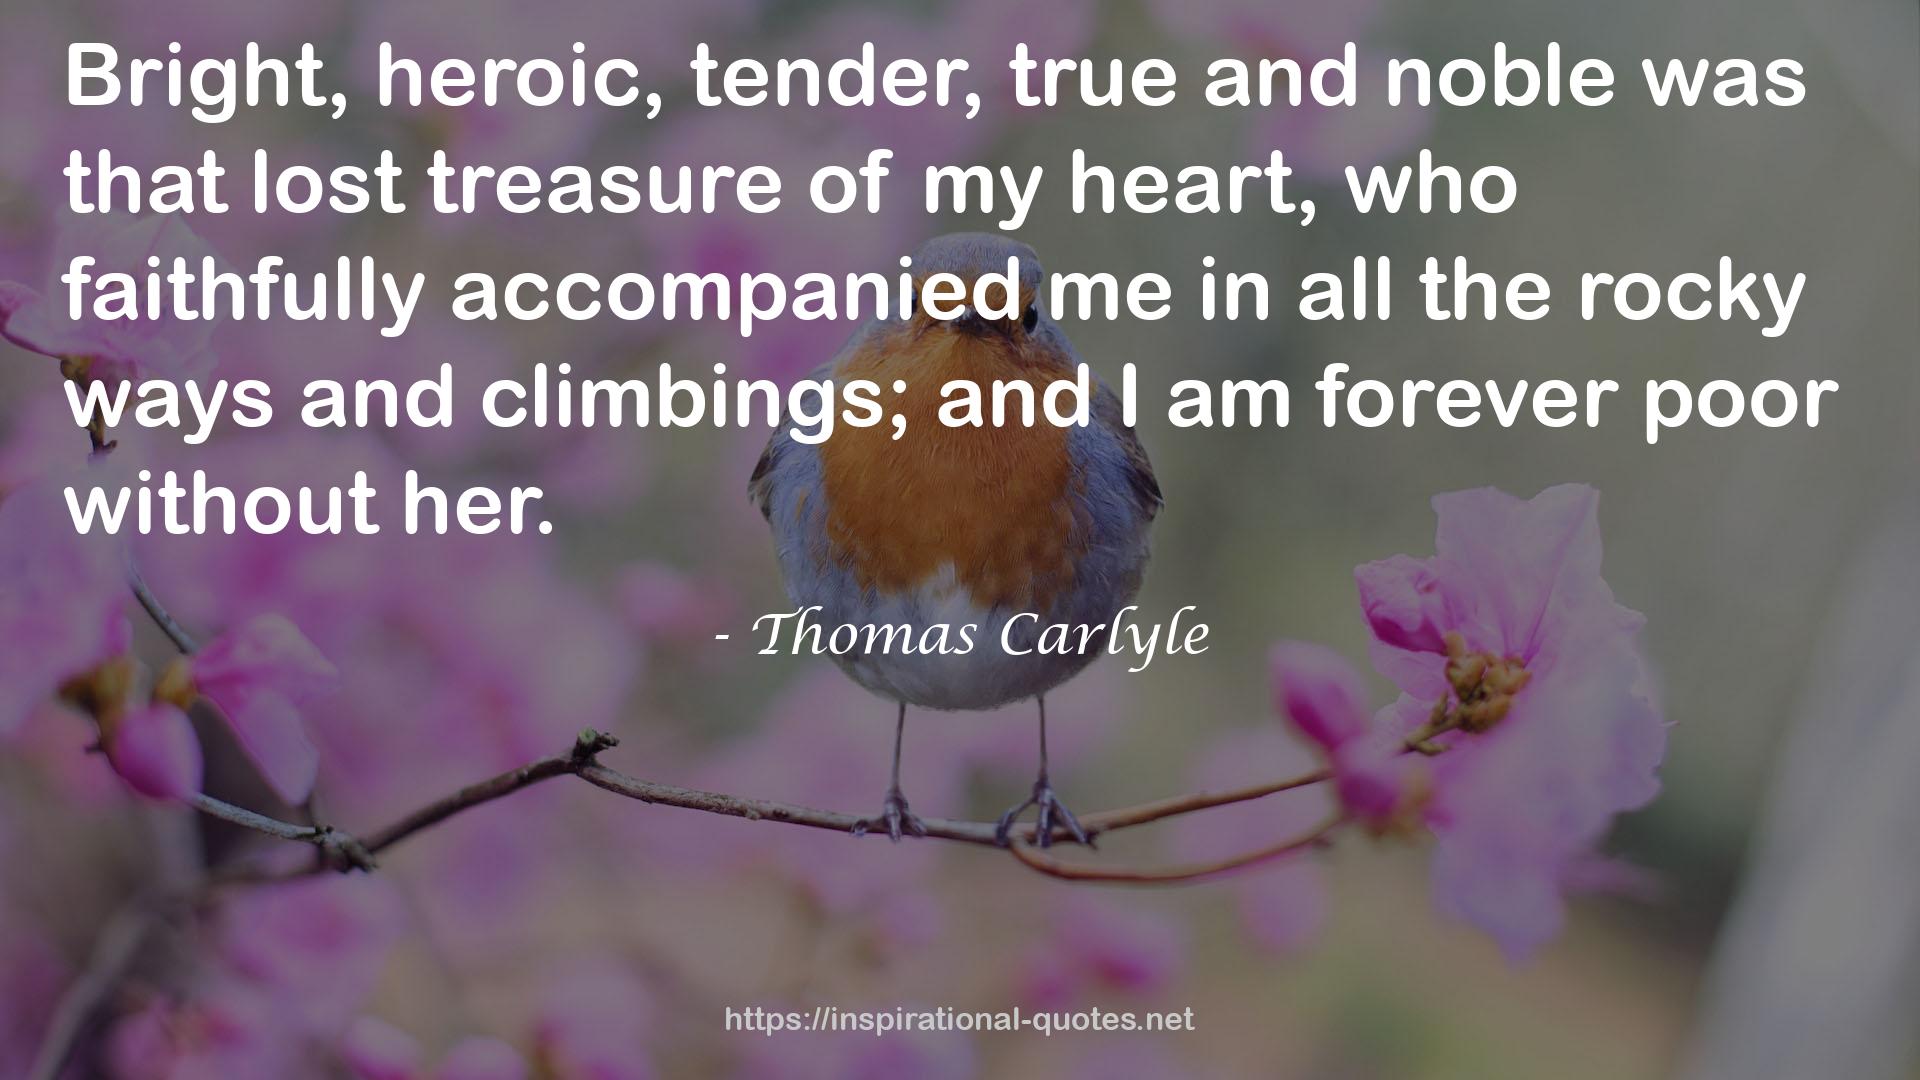 Thomas Carlyle QUOTES